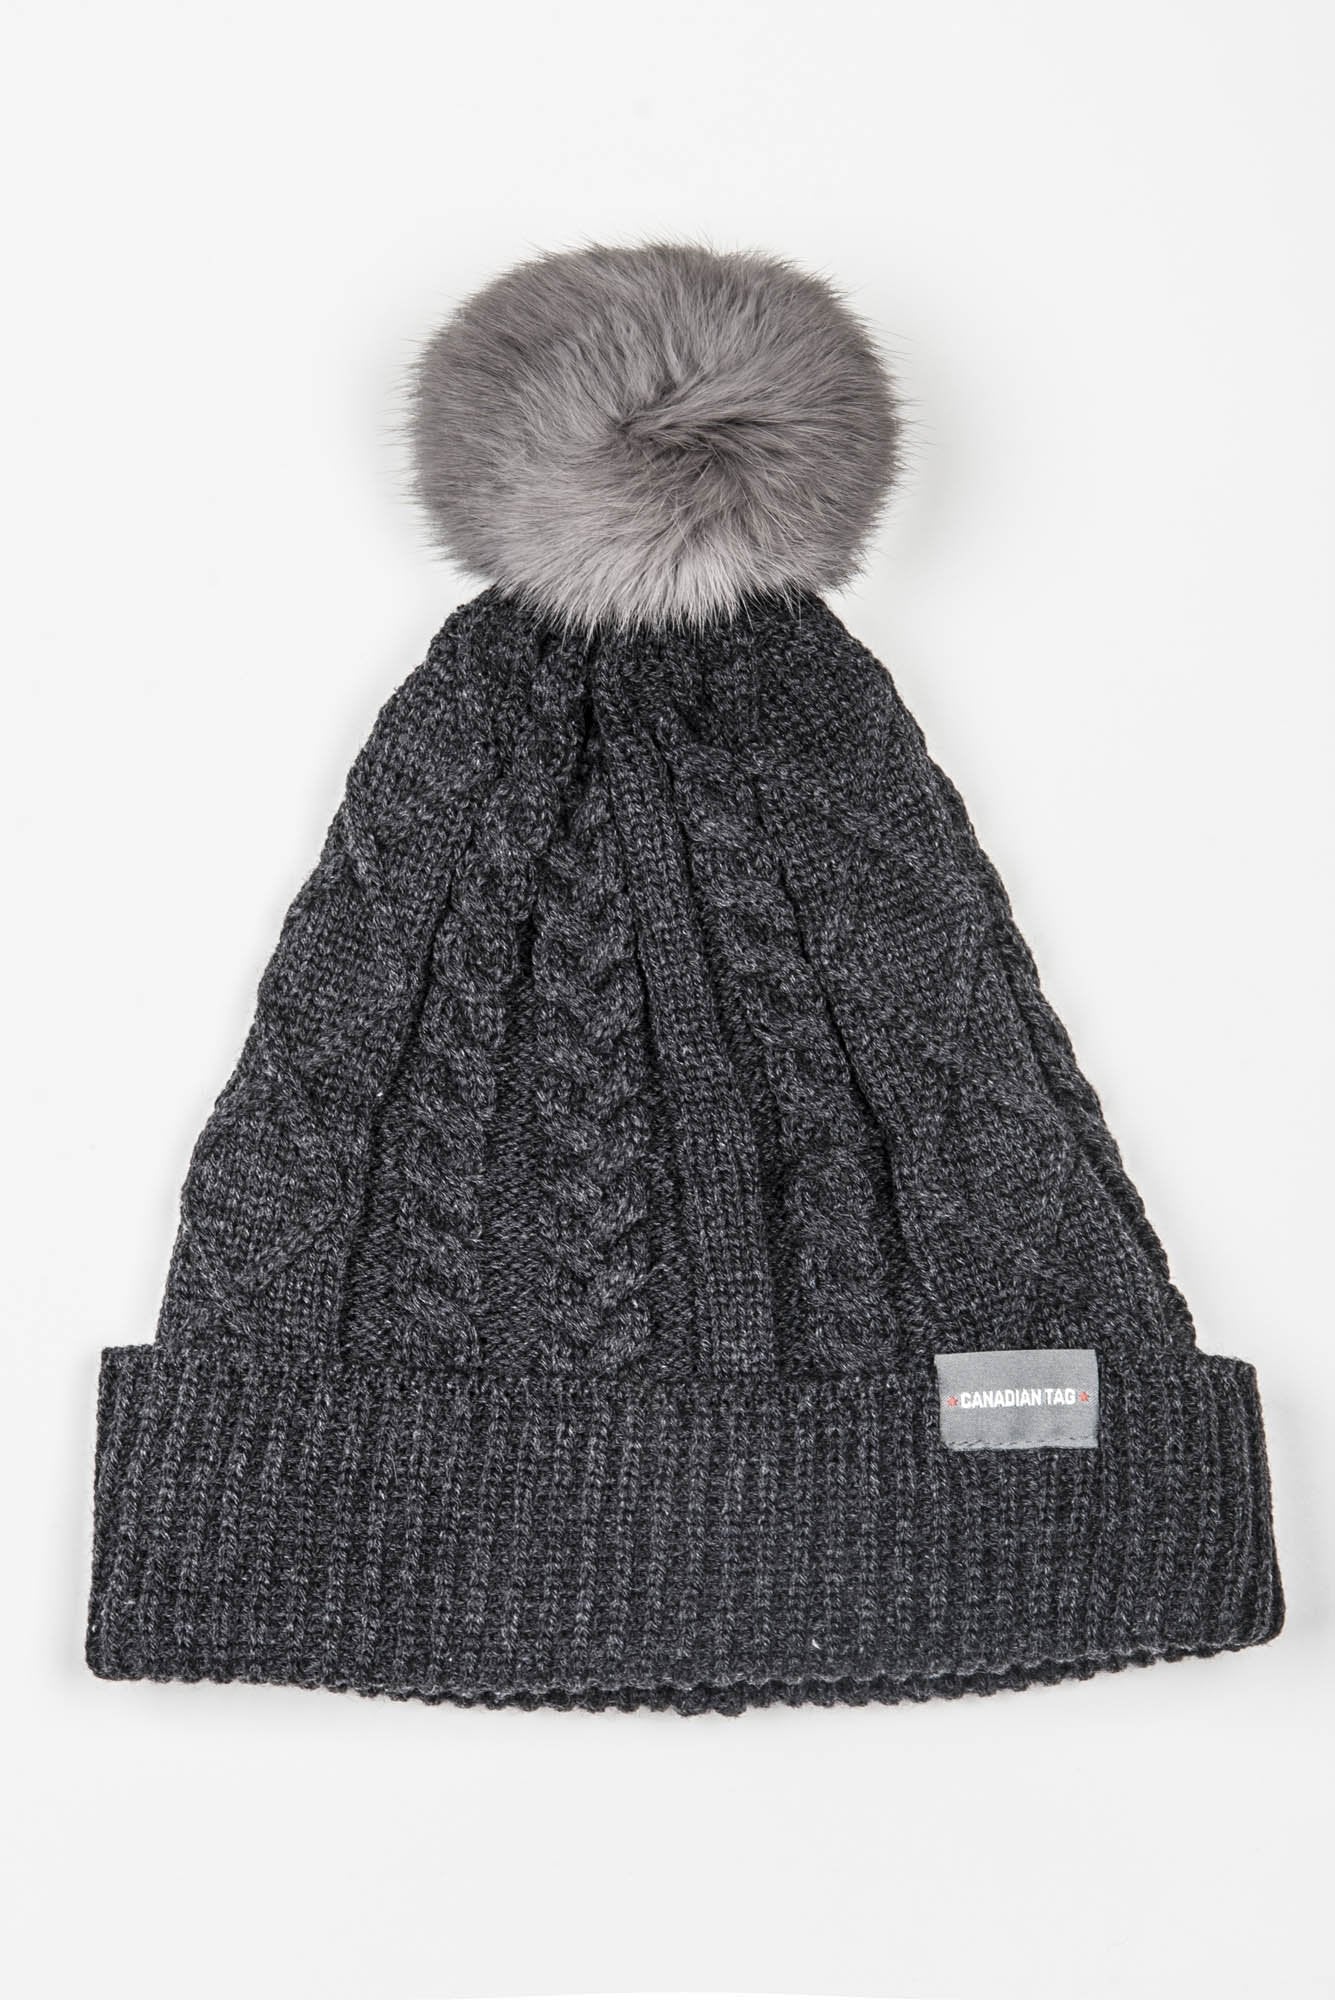 CANADIAN TAG-F-TUQUE WINDSOR